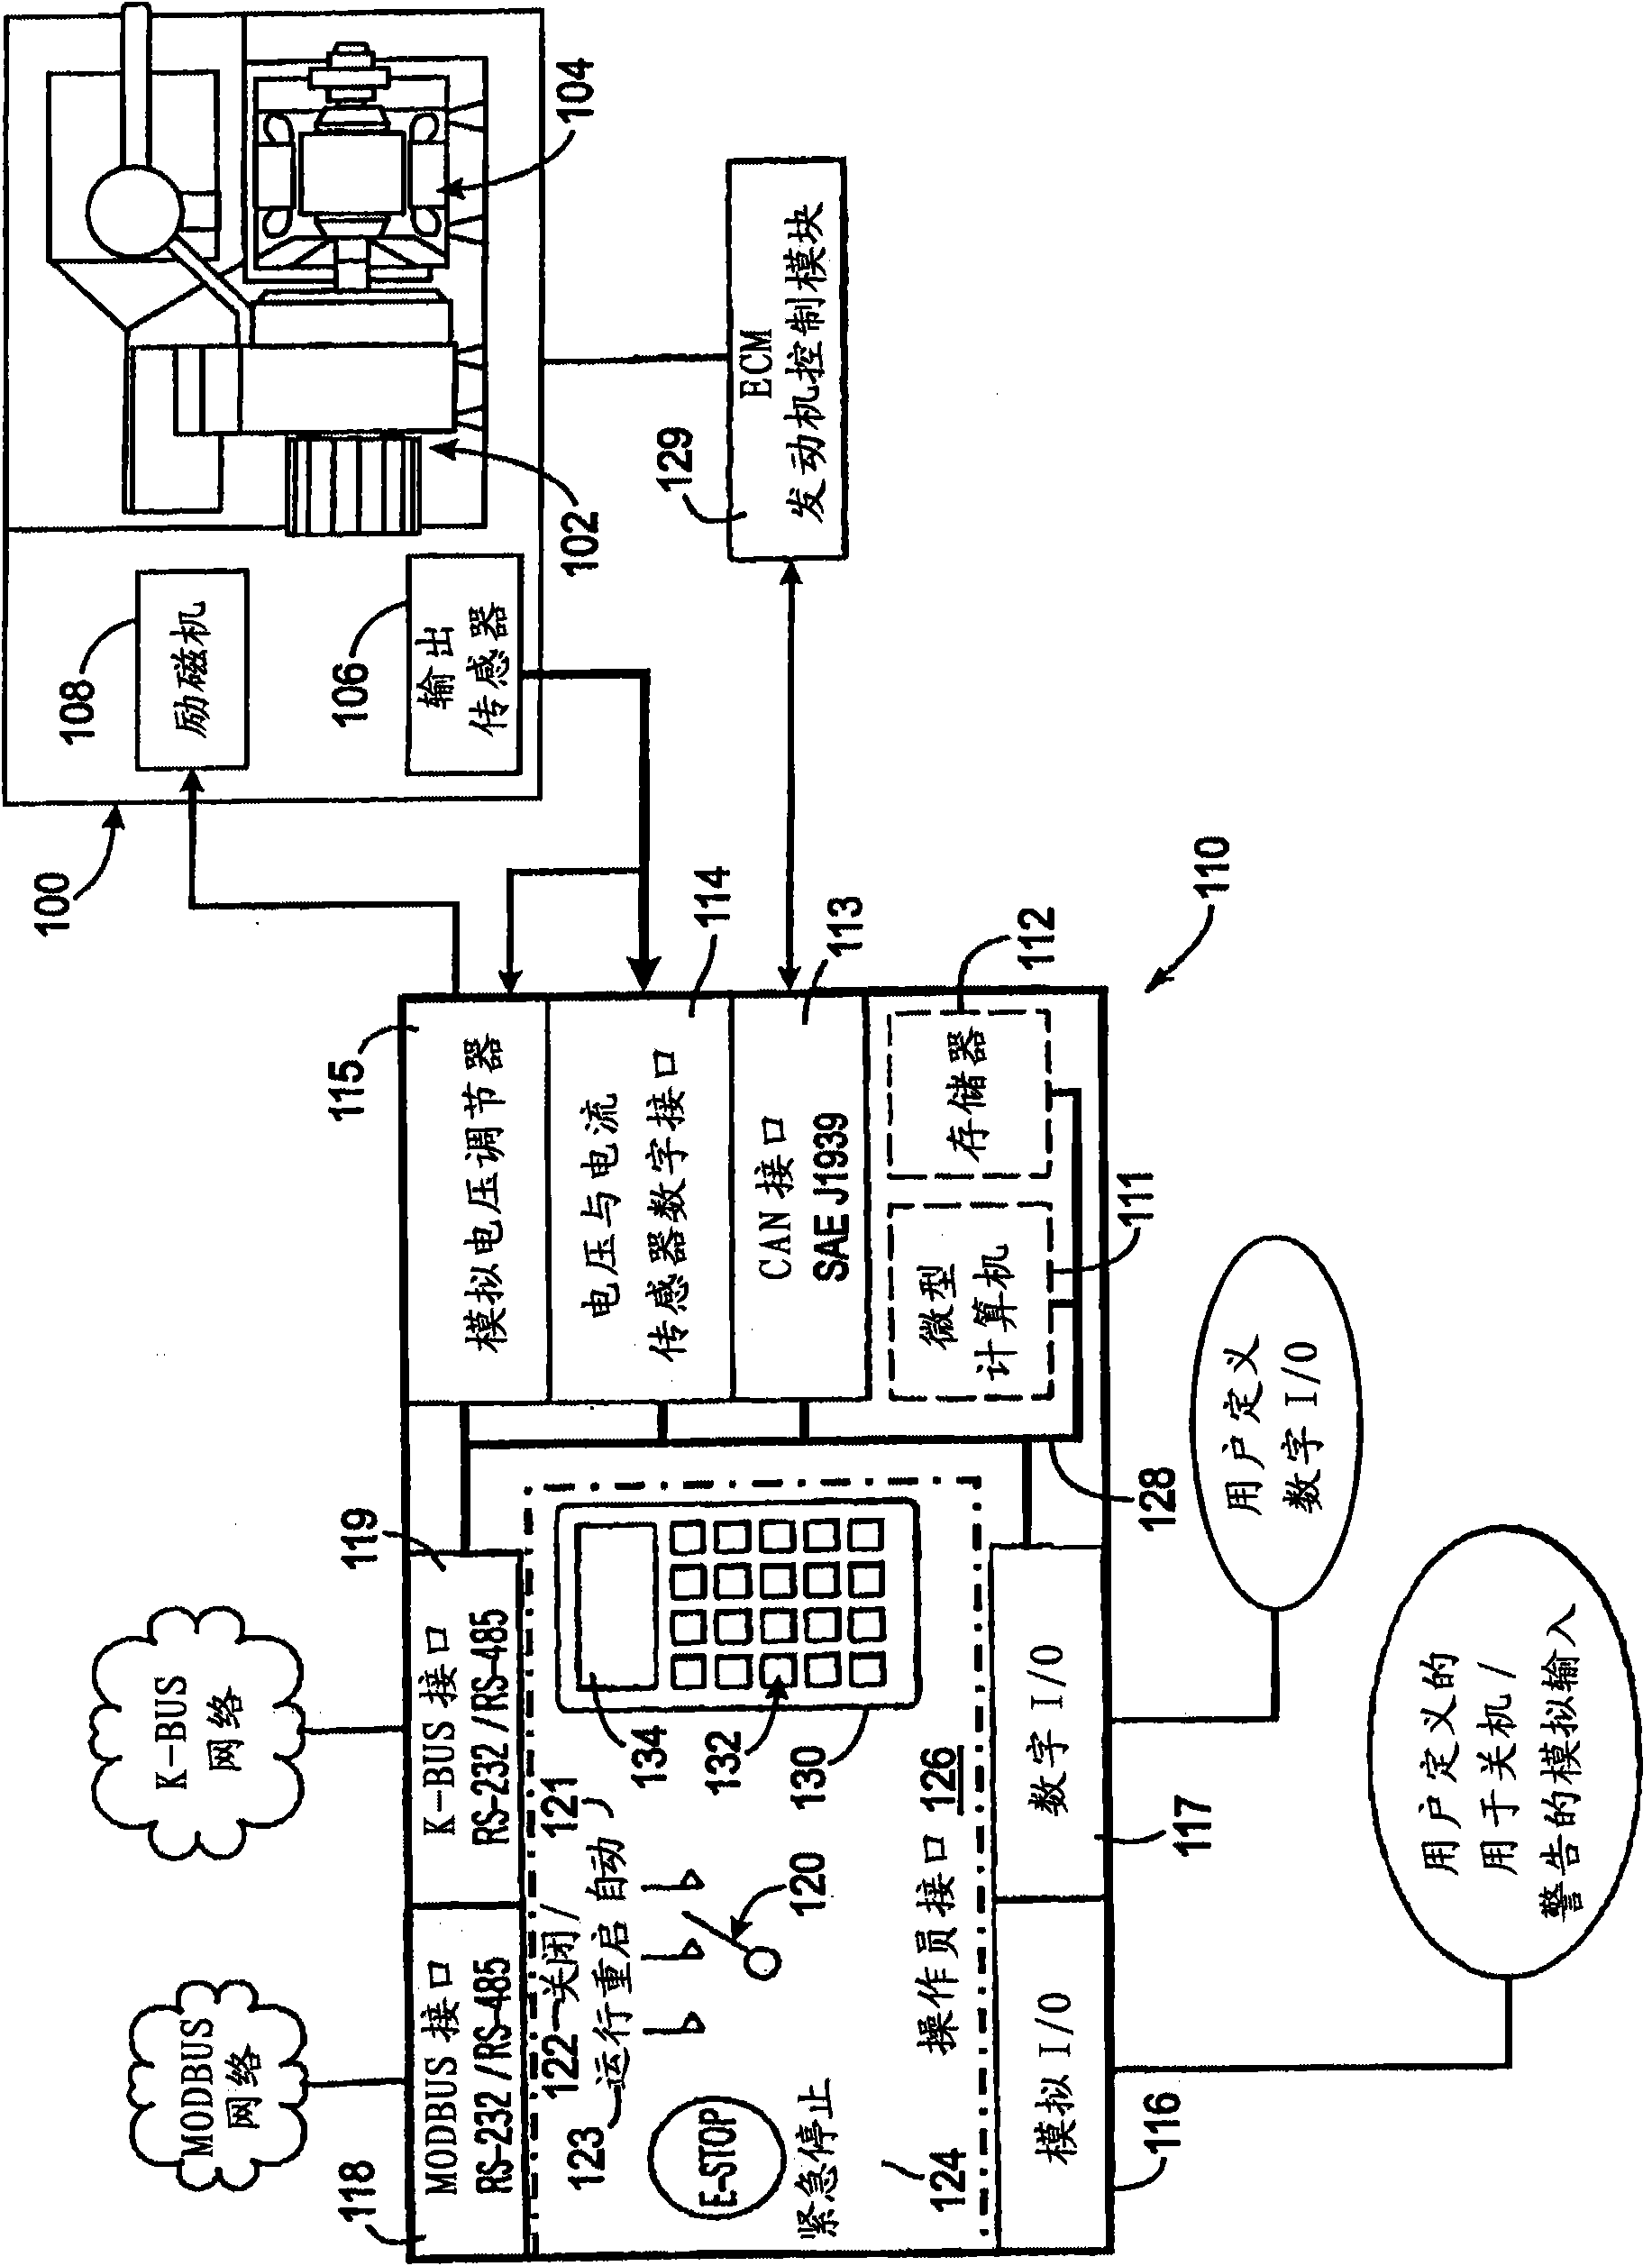 Method and apparatus for regulating excitation of an alternator